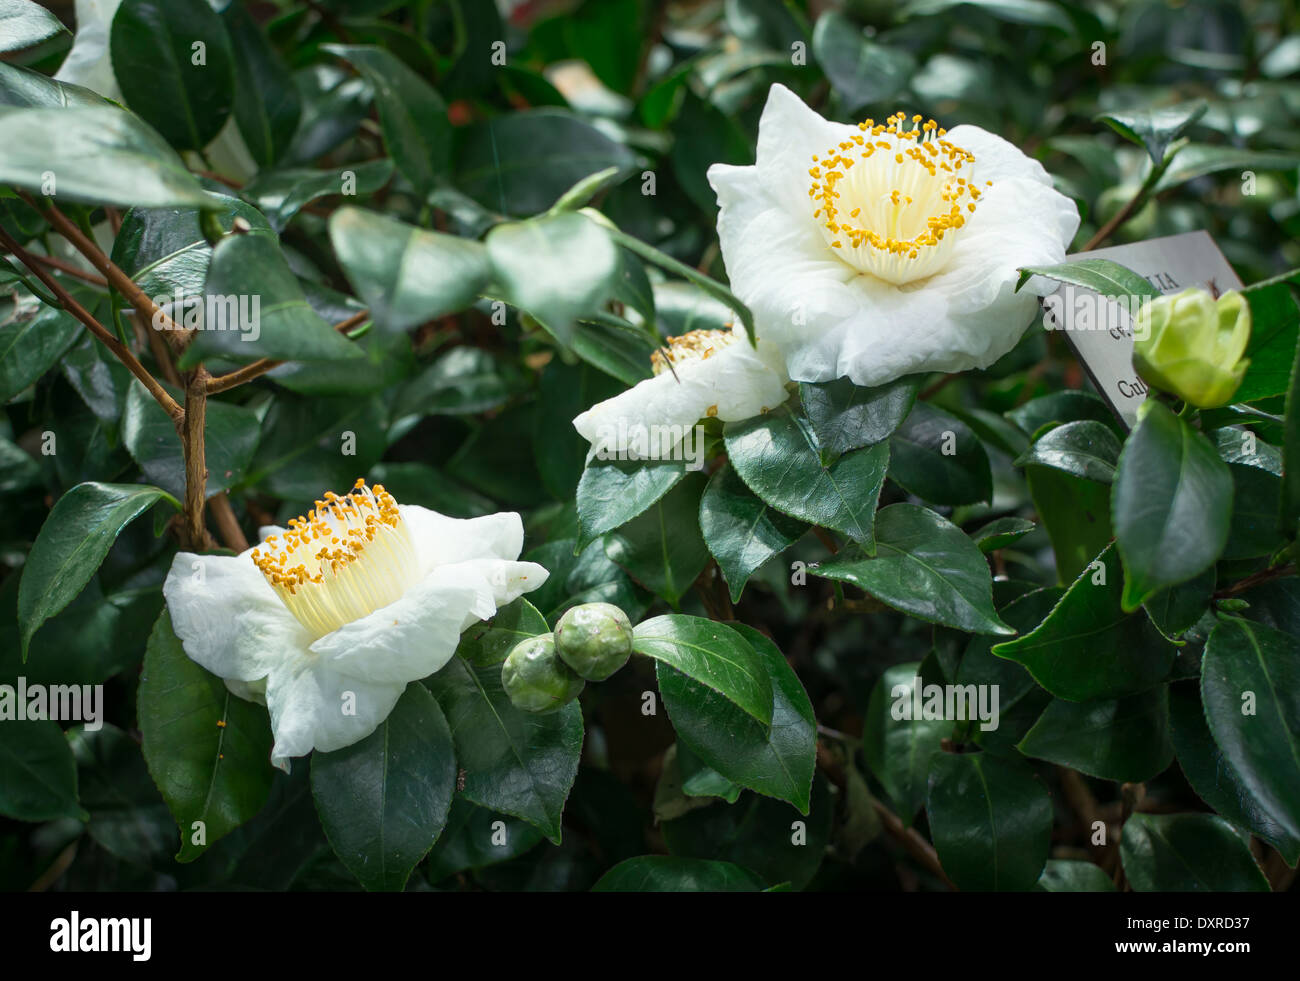 White Camellias with buds in lush green foliage. Stock Photo